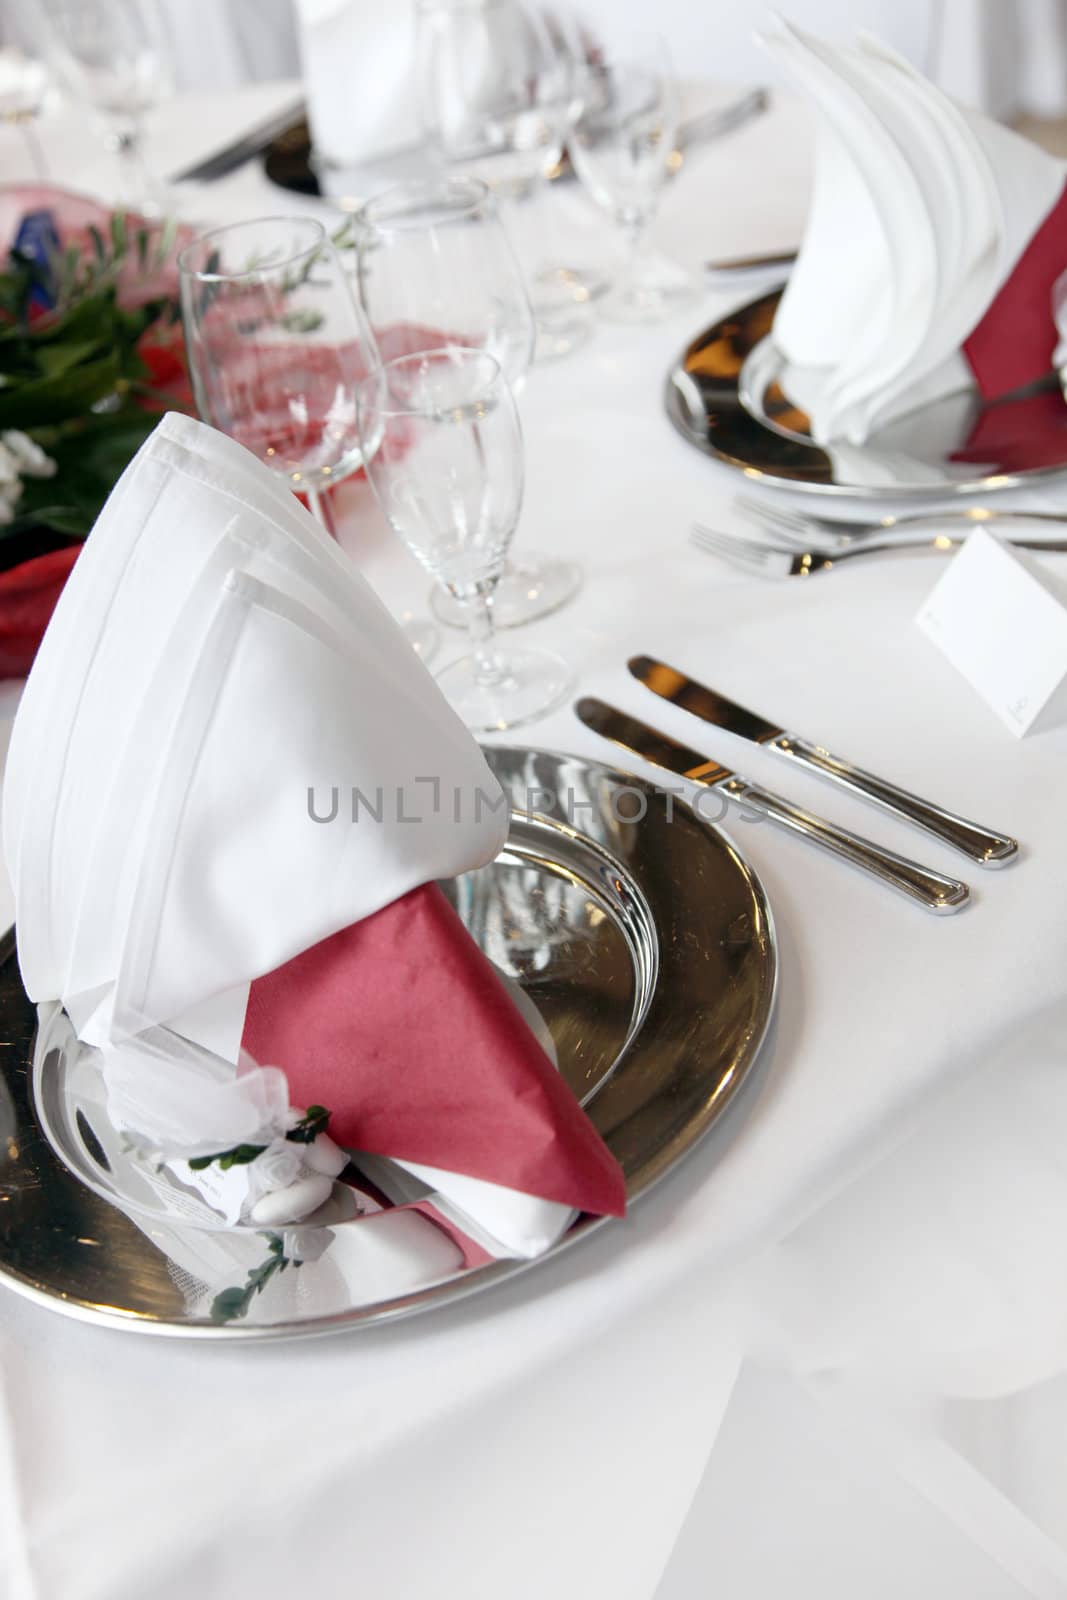 Elegant formal table setting at a function with silverware and decorative folded napkins